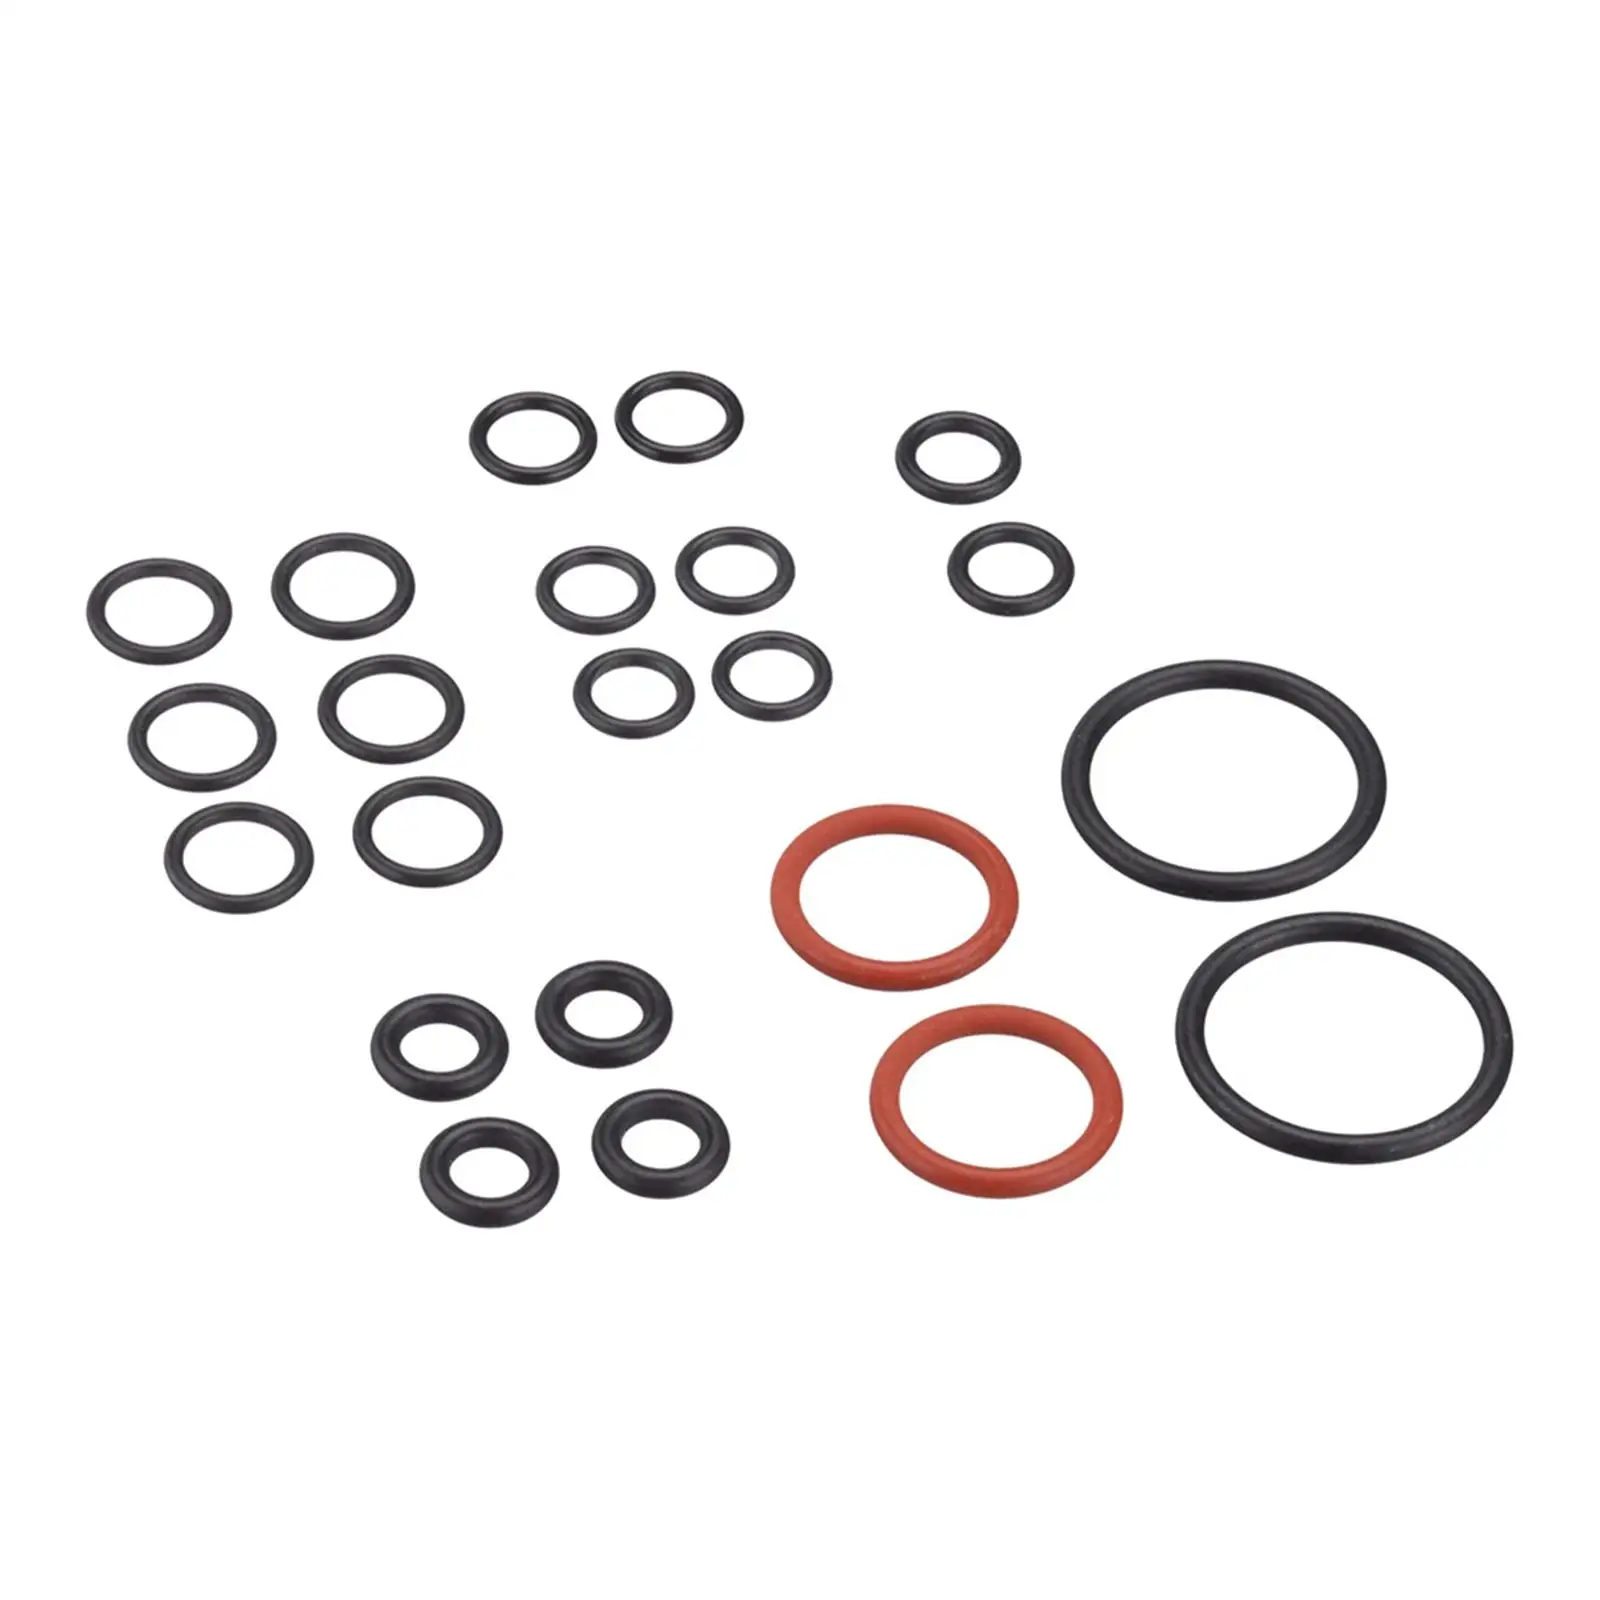 Pack of 22 Sealing Rings Hose Nozzle Jet Lance Seals Gasket Washers O-Rings for Karcher Detailed Nozzles